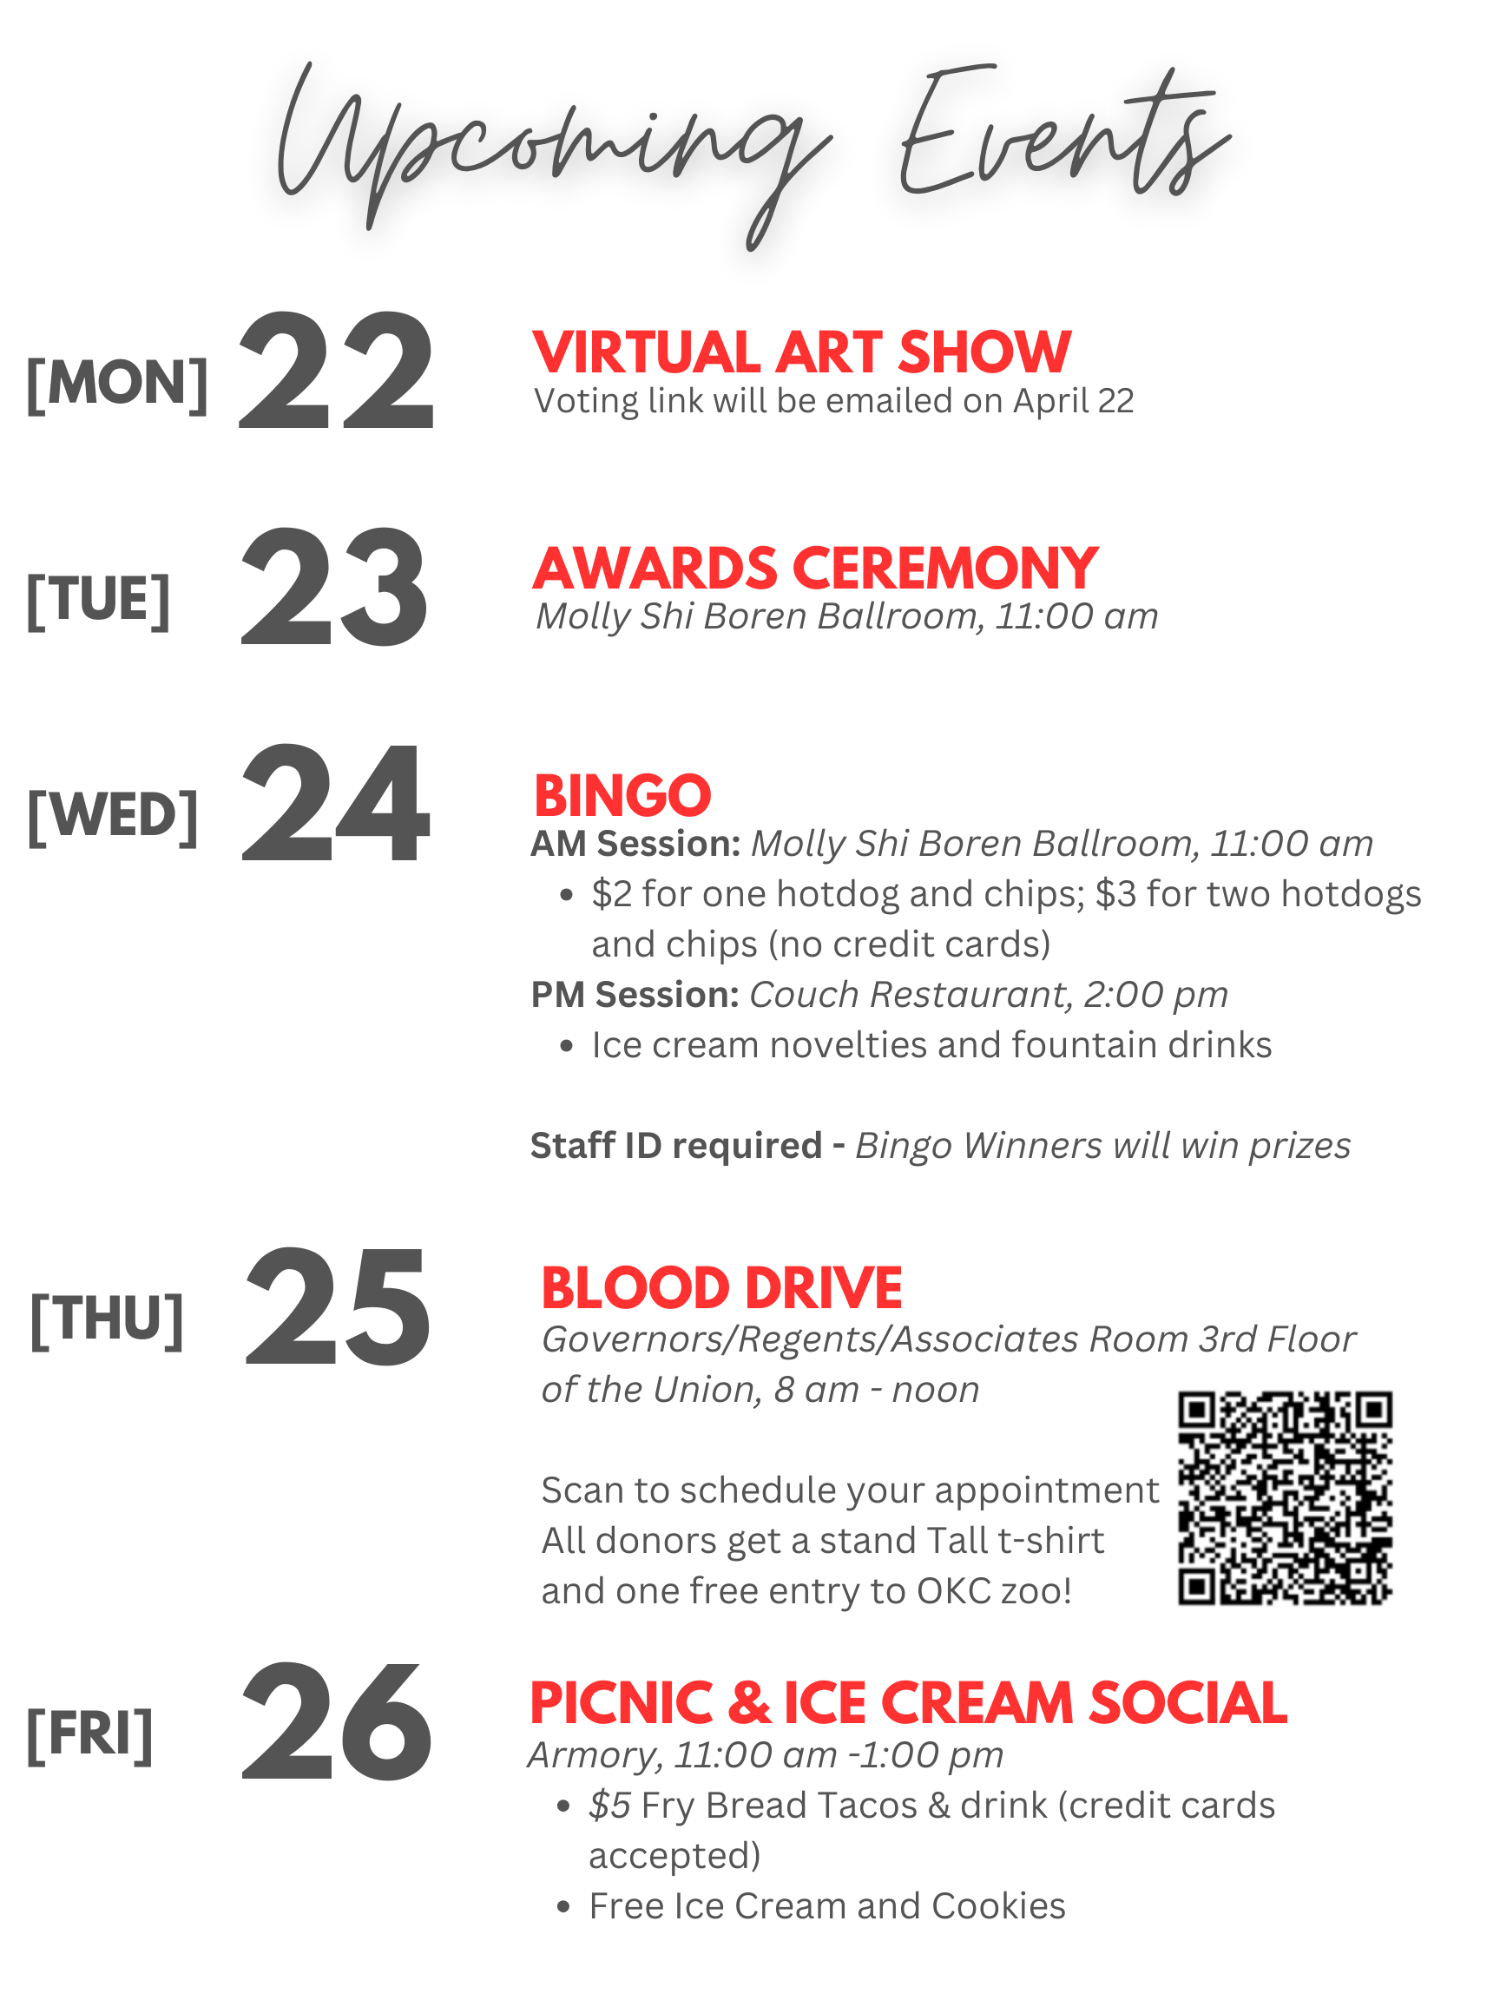 upcoming events, [Monday] 24 Virtual Art Show voting link will be emailed on April 24, Blood Drive Forum Conference Room A, 8:30 to noon. [Tuesday] Awards Ceremony Molly Shi Boren Ballroom at 11am.  [Wed]  Bingo AM session: Molly Shi Boren Ballroom 11am, 2 dollars for one hotdog and chips 3 dollars for two hotdogs and chips.  PM session couch restaurant 2pm ice cream novelties and fountain drinks staff id required bingo winners will win prizes. [Thursday] 27 Blood Drive Beaird Lounge 8am until noon. [Friday] 28 Picnic and ice cream social armory 11 am until 1:30 pm 5 dollar fry bread tacos and drink and free ice cream and cookies